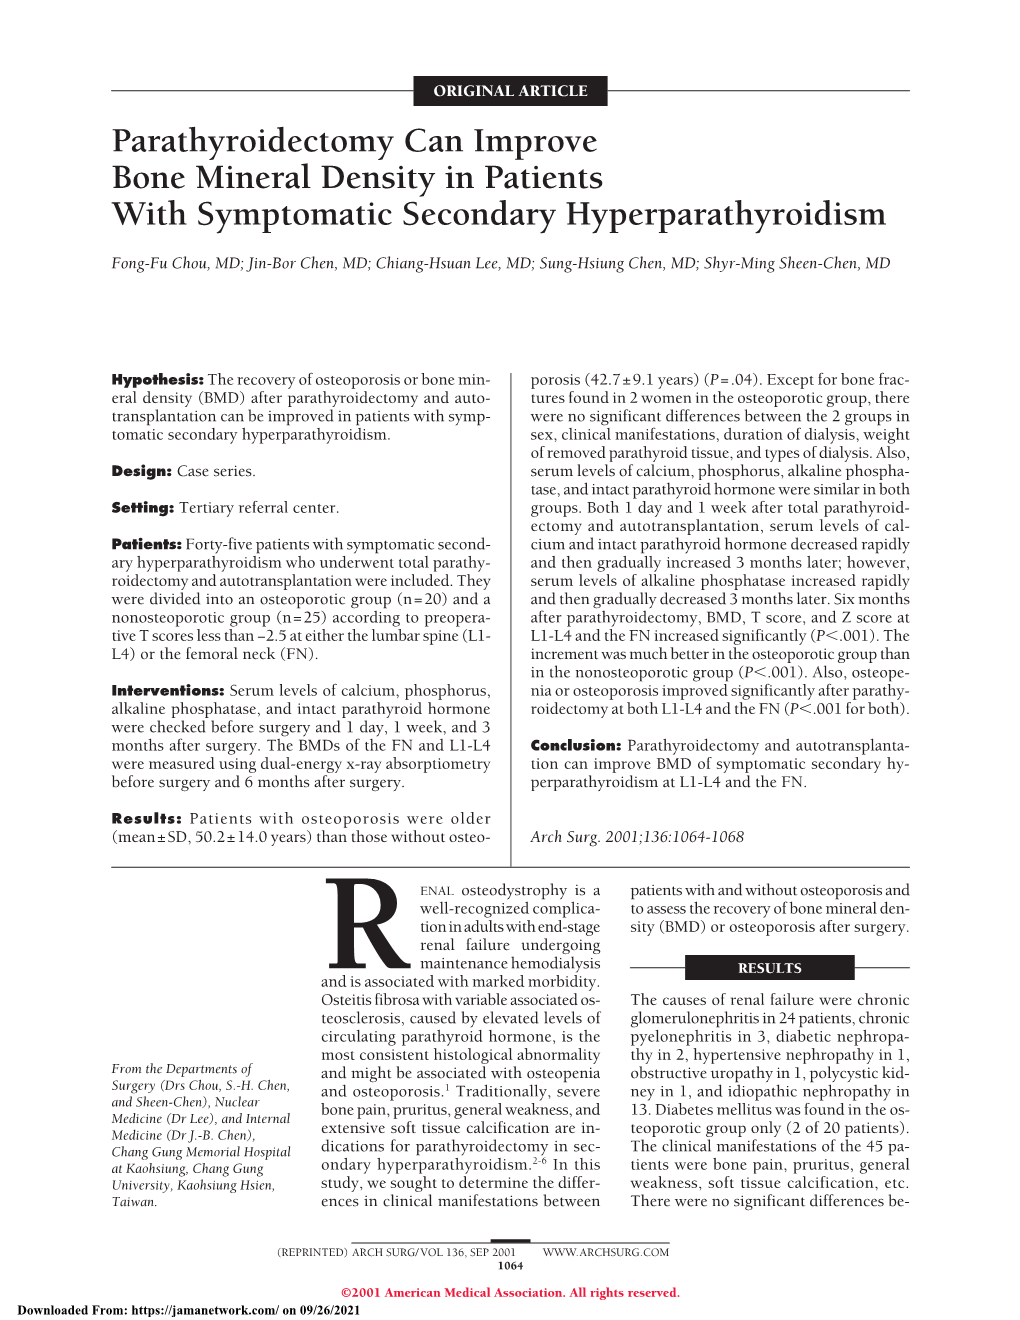 Parathyroidectomy Can Improve Bone Mineral Density in Patients with Symptomatic Secondary Hyperparathyroidism